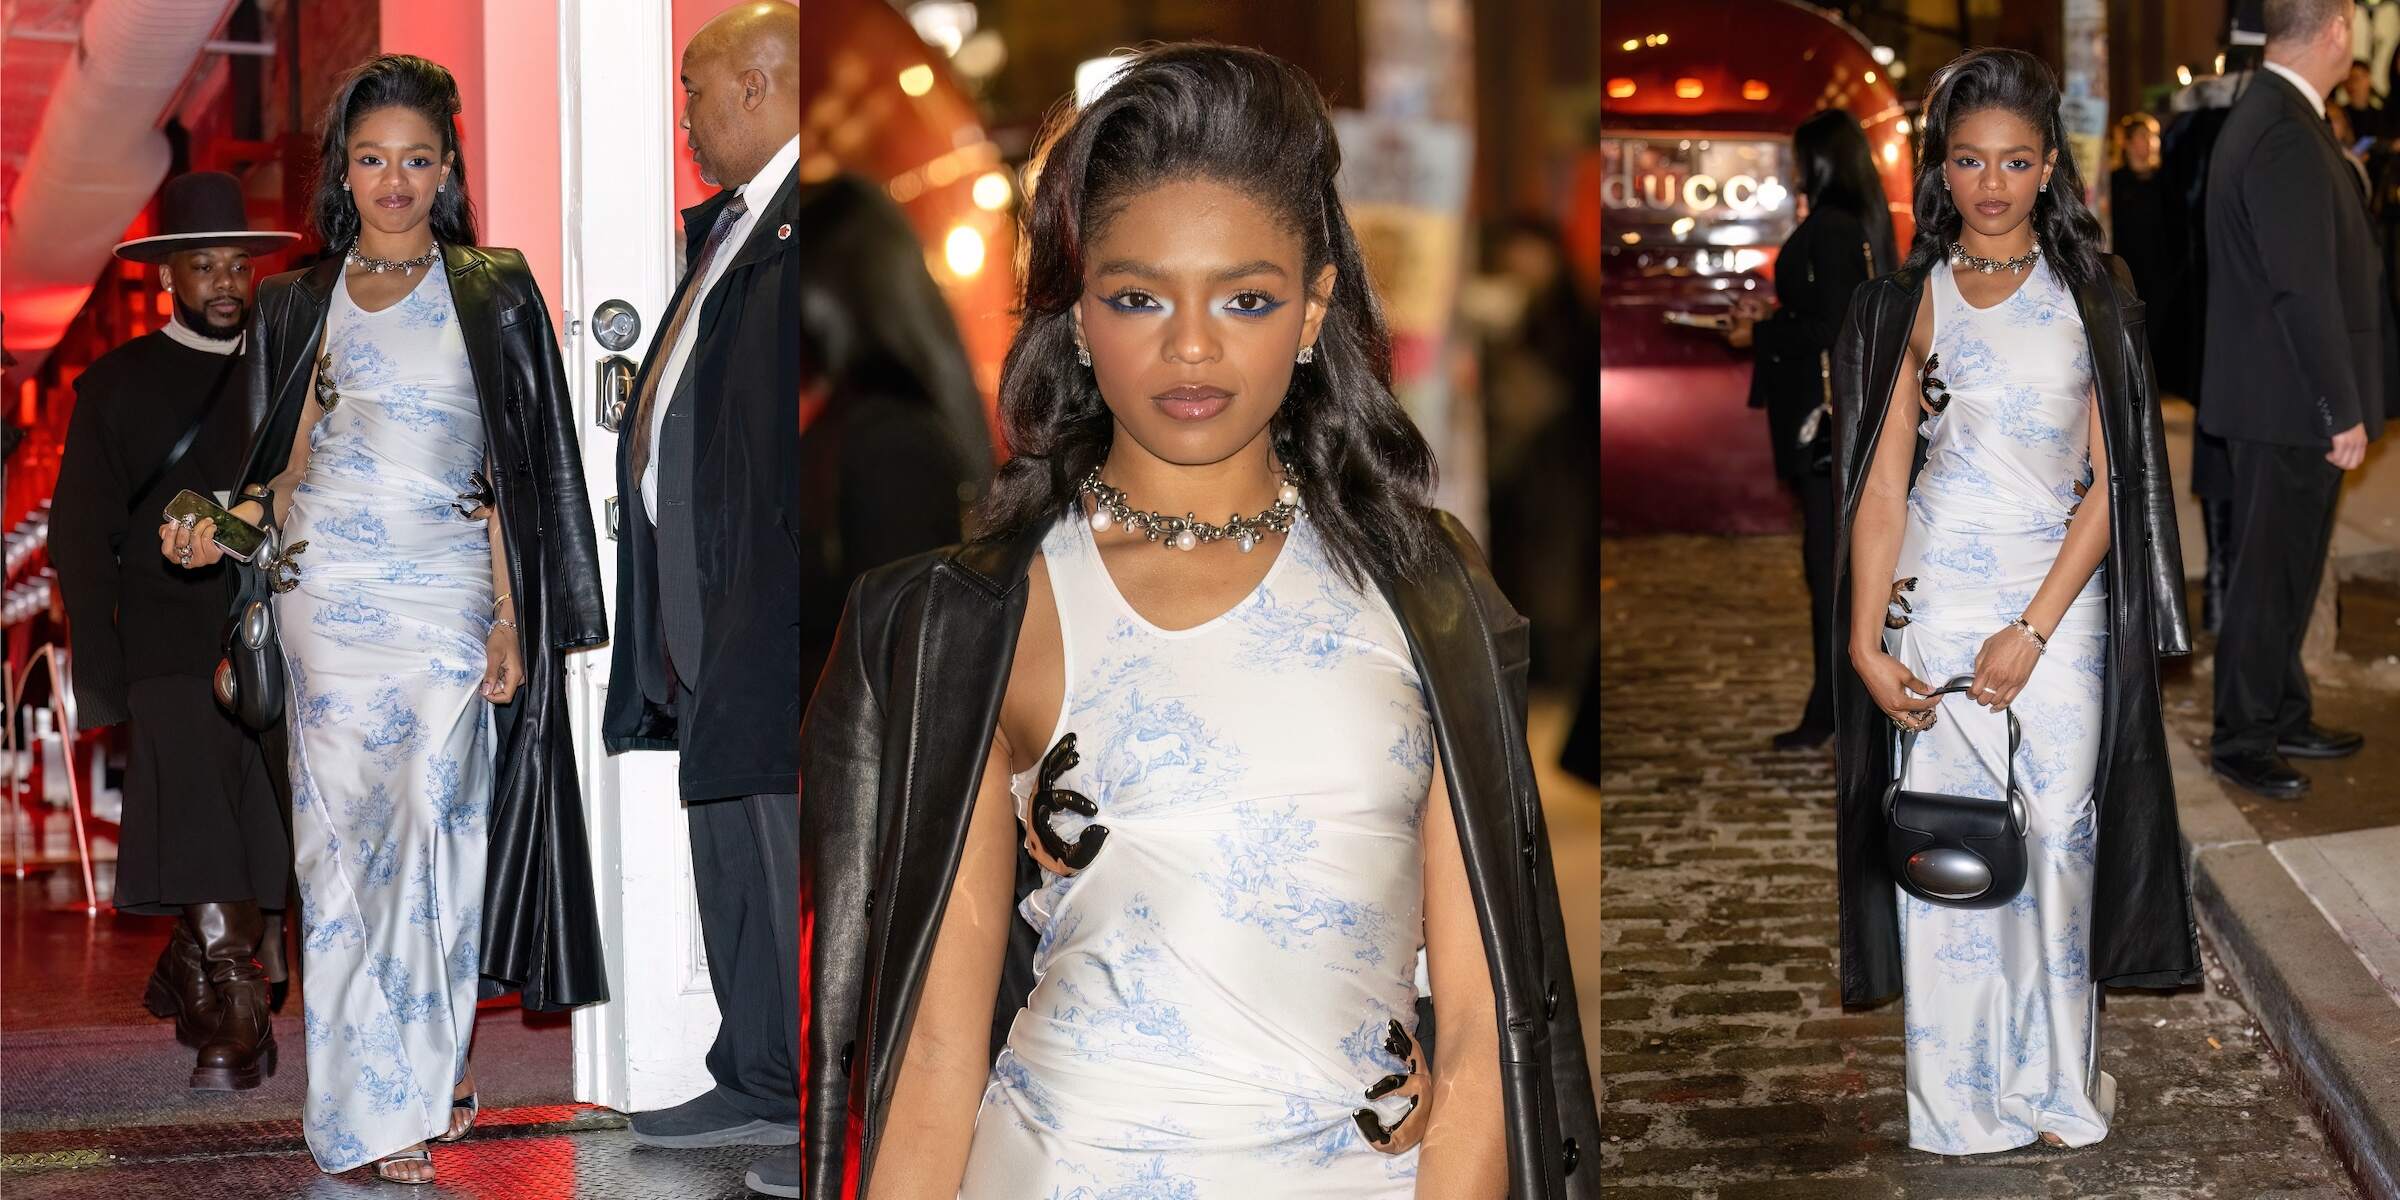 Wearing a white and blue floral dress, Selah Marley attends a Gucci party during New York Fashion Week 2024